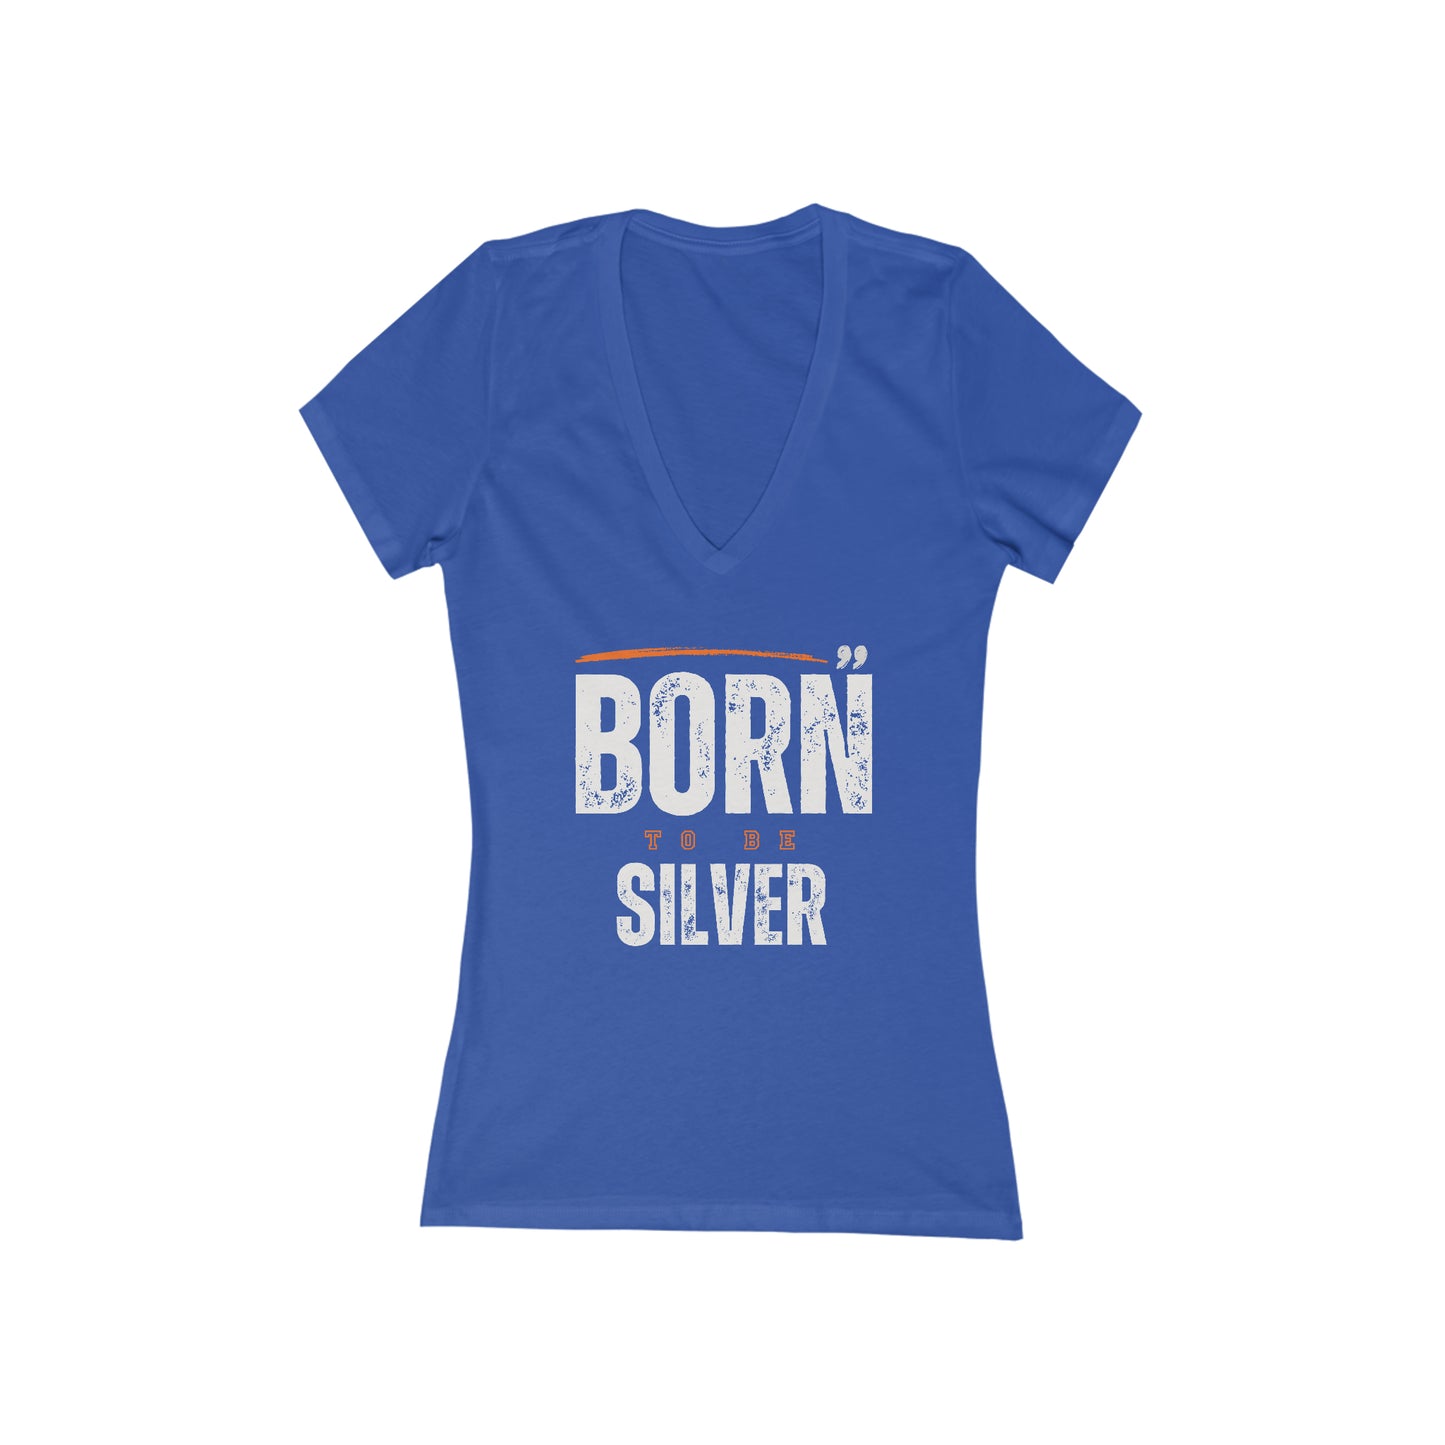 BORN To Be SILVER, short sleeve deep v-neck t-shirt, for women embracing silver and gray hair